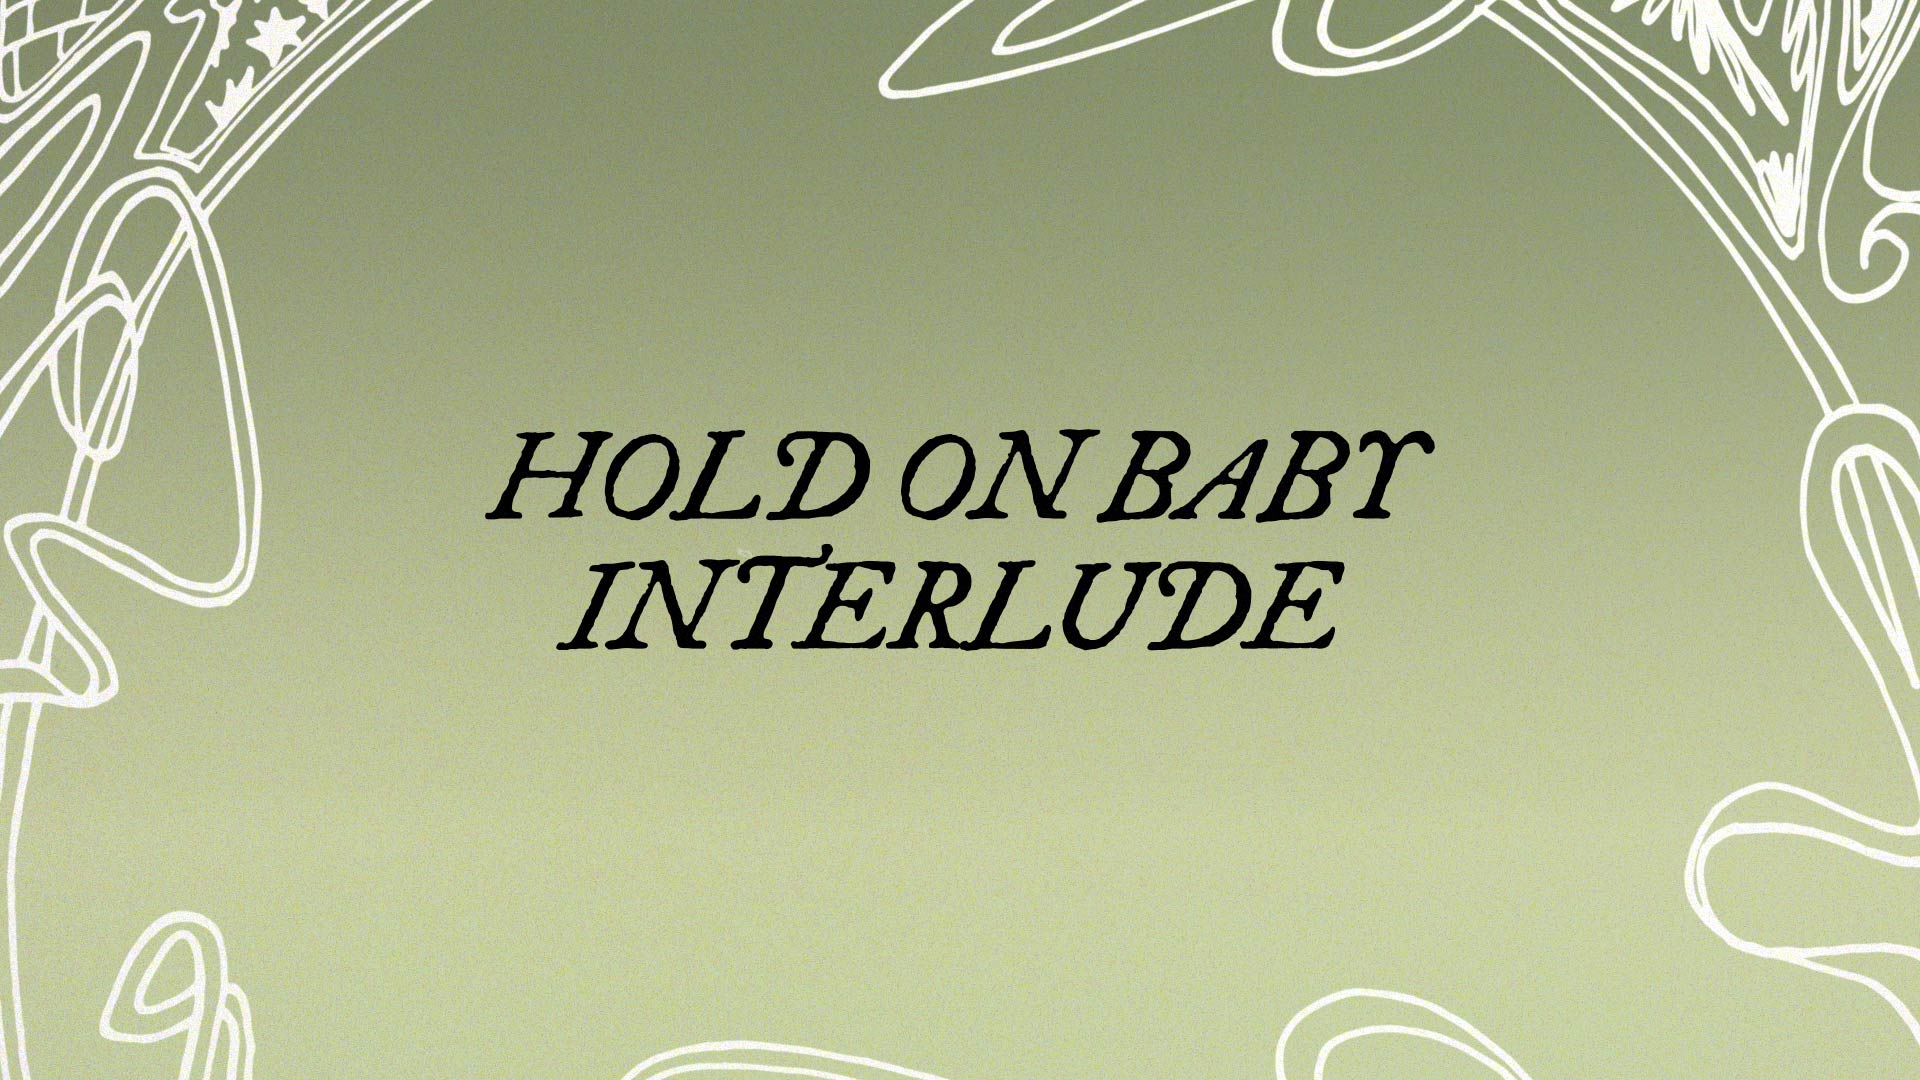 Hold on Baby Interlude